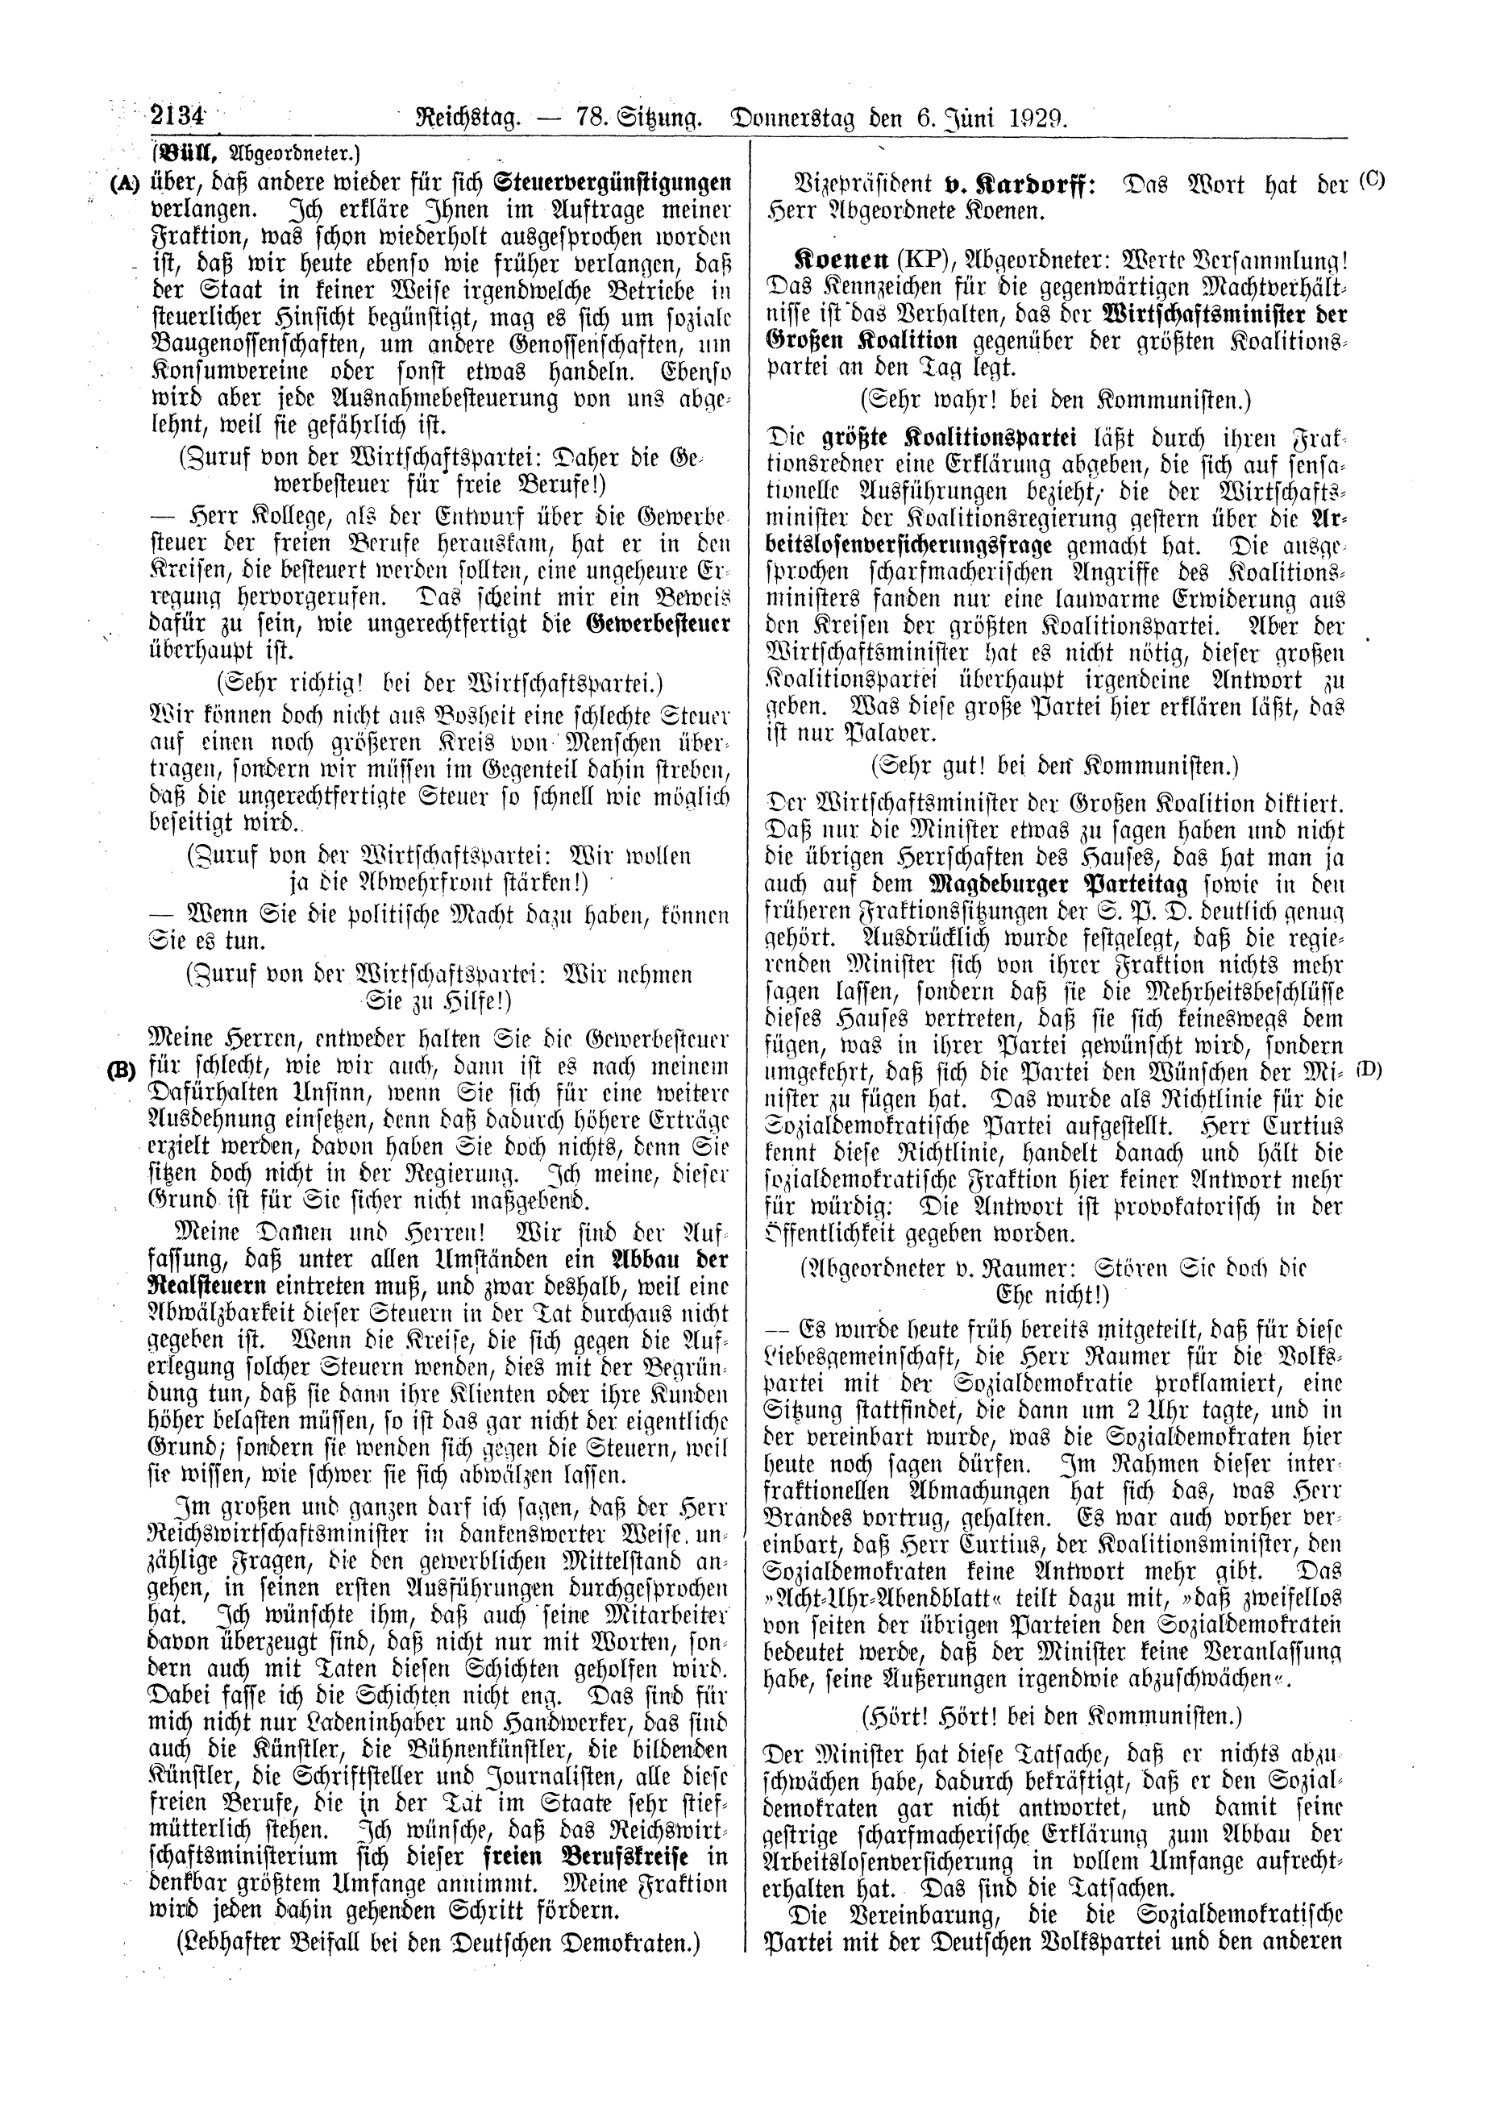 Scan of page 2134